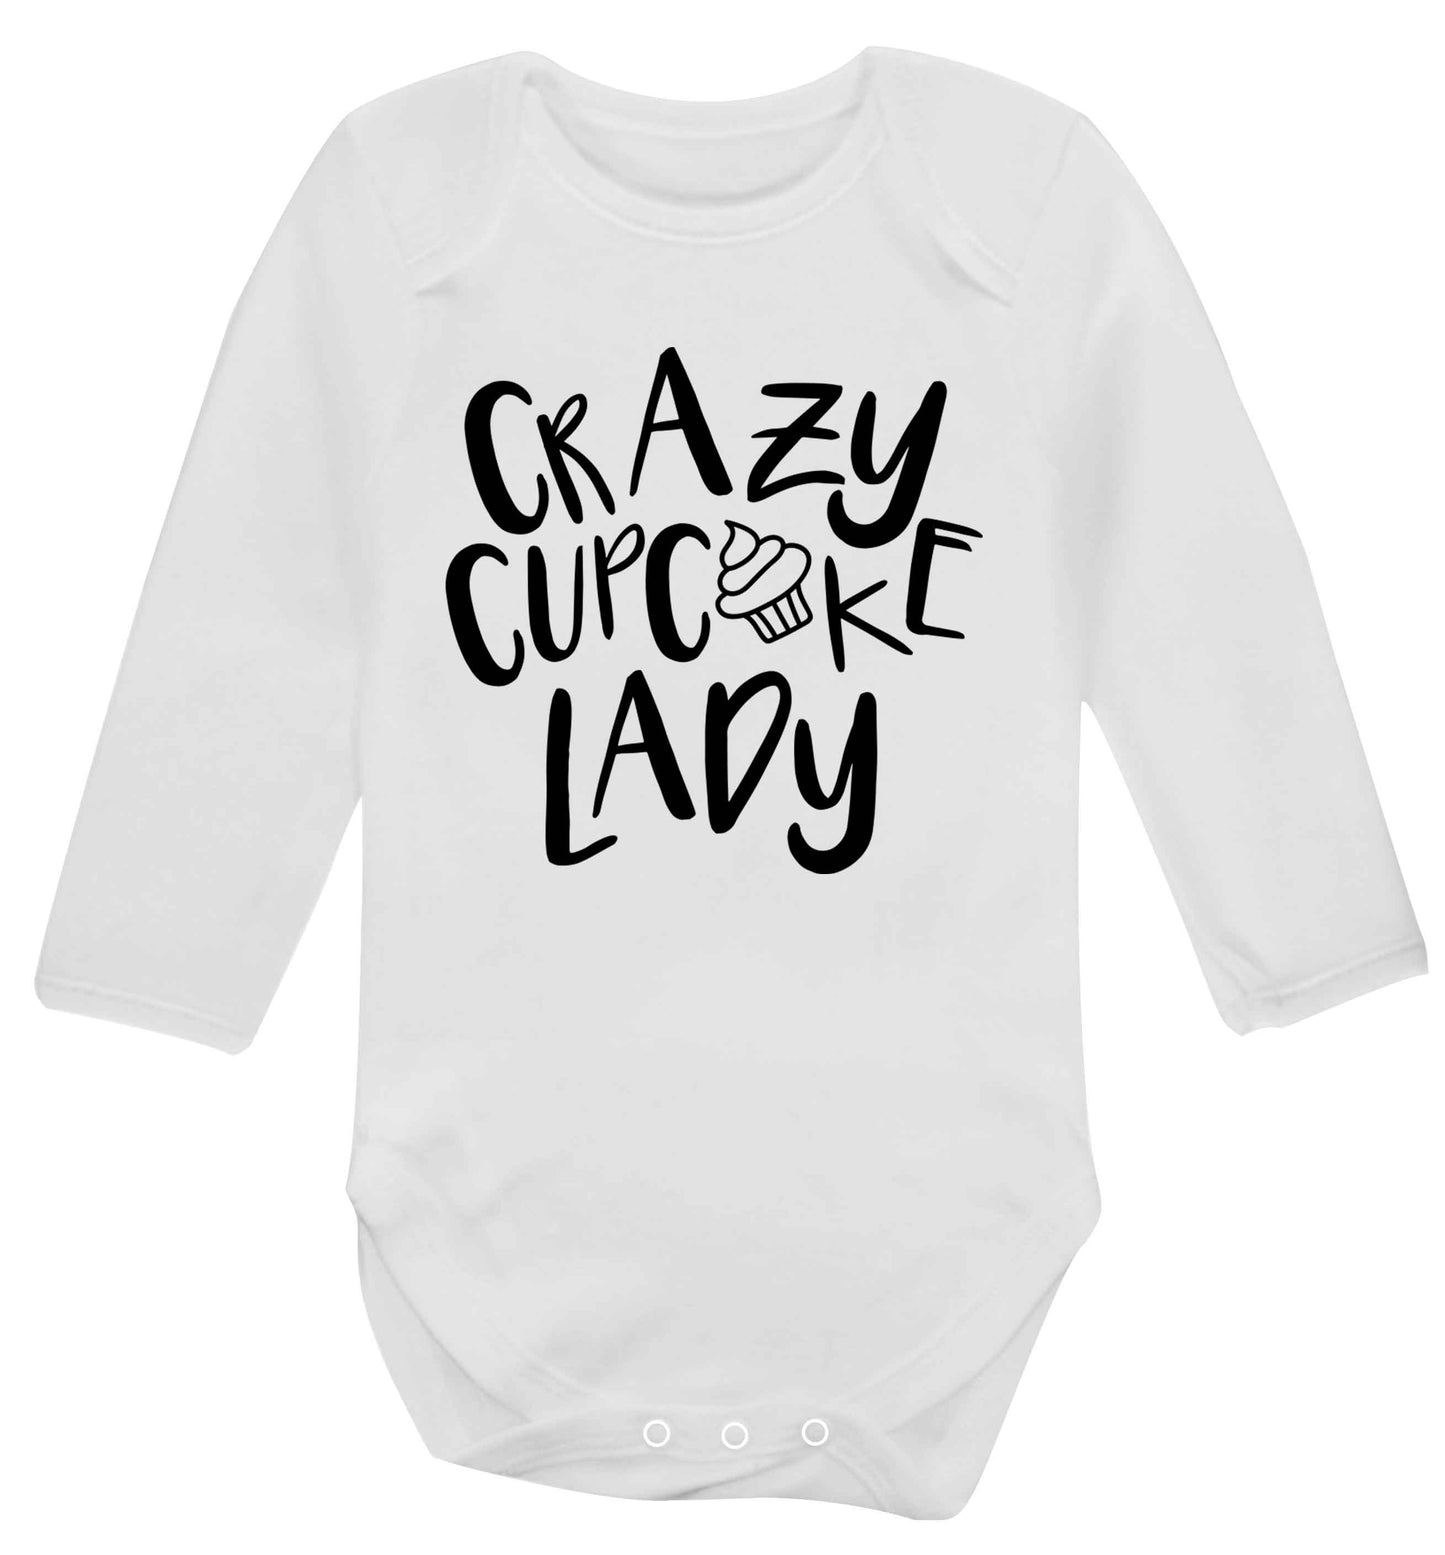 Crazy cupcake lady Baby Vest long sleeved white 6-12 months